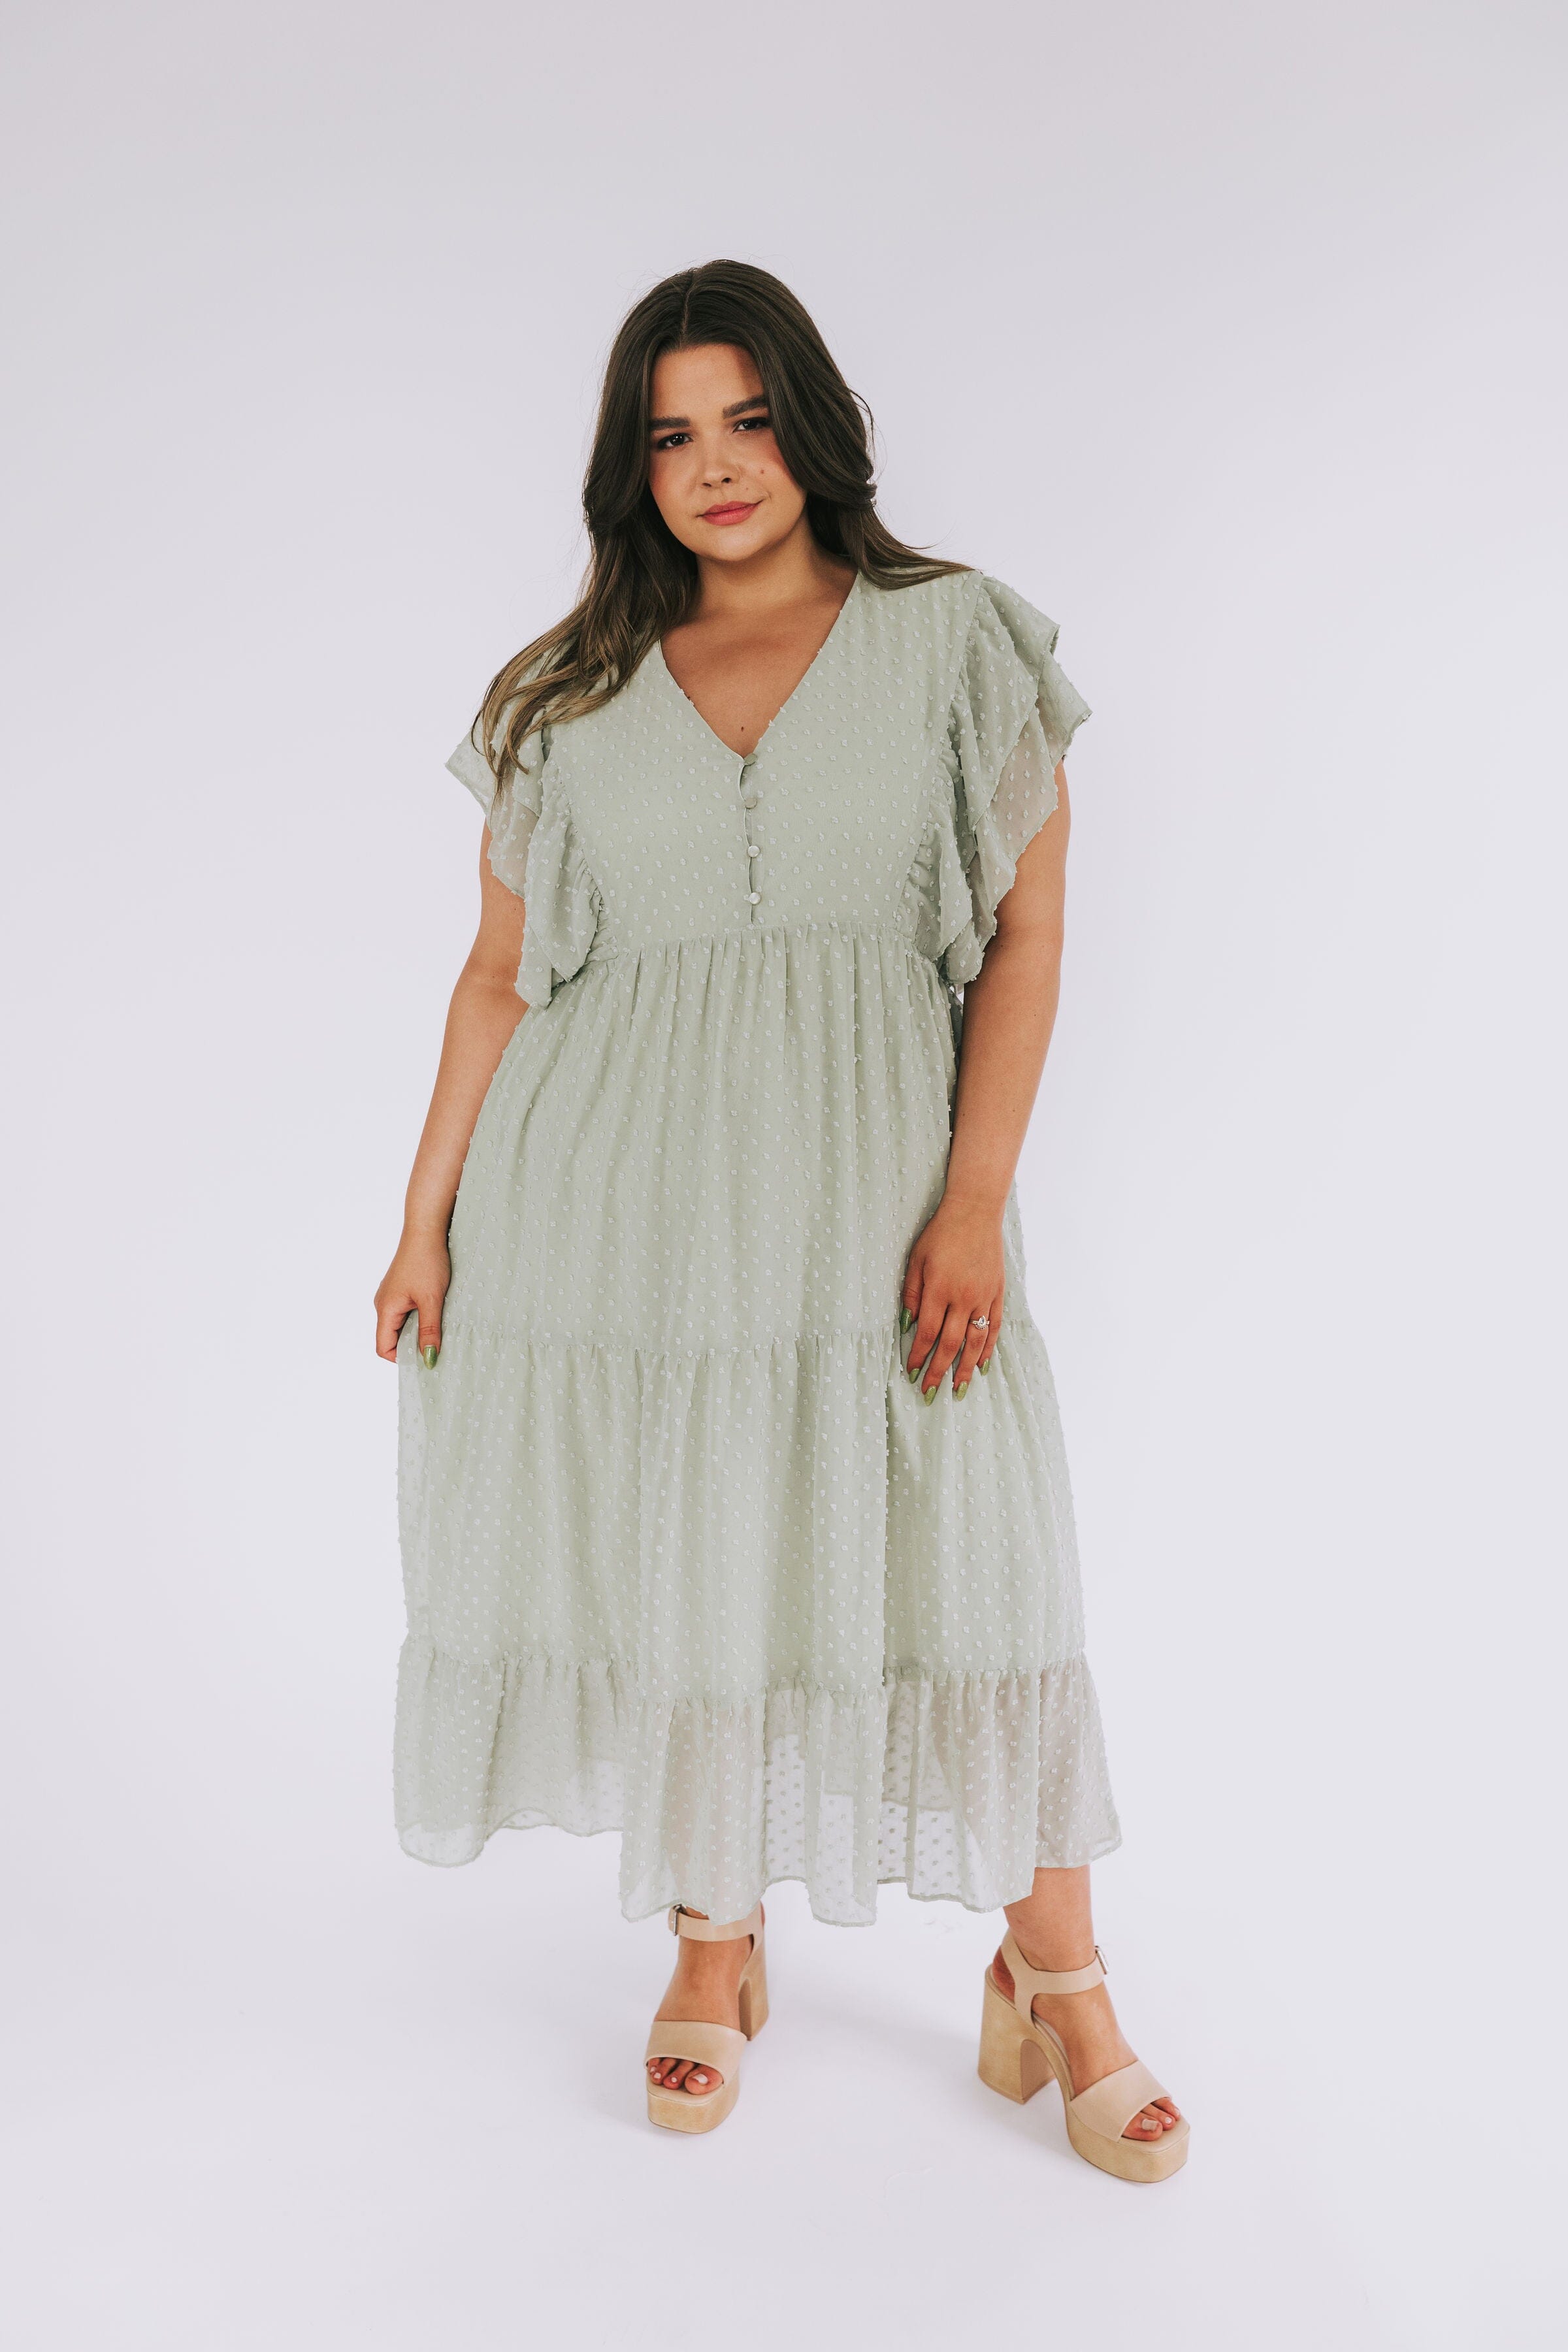 ONE LOVED BABE - June Dress - 8 Colors